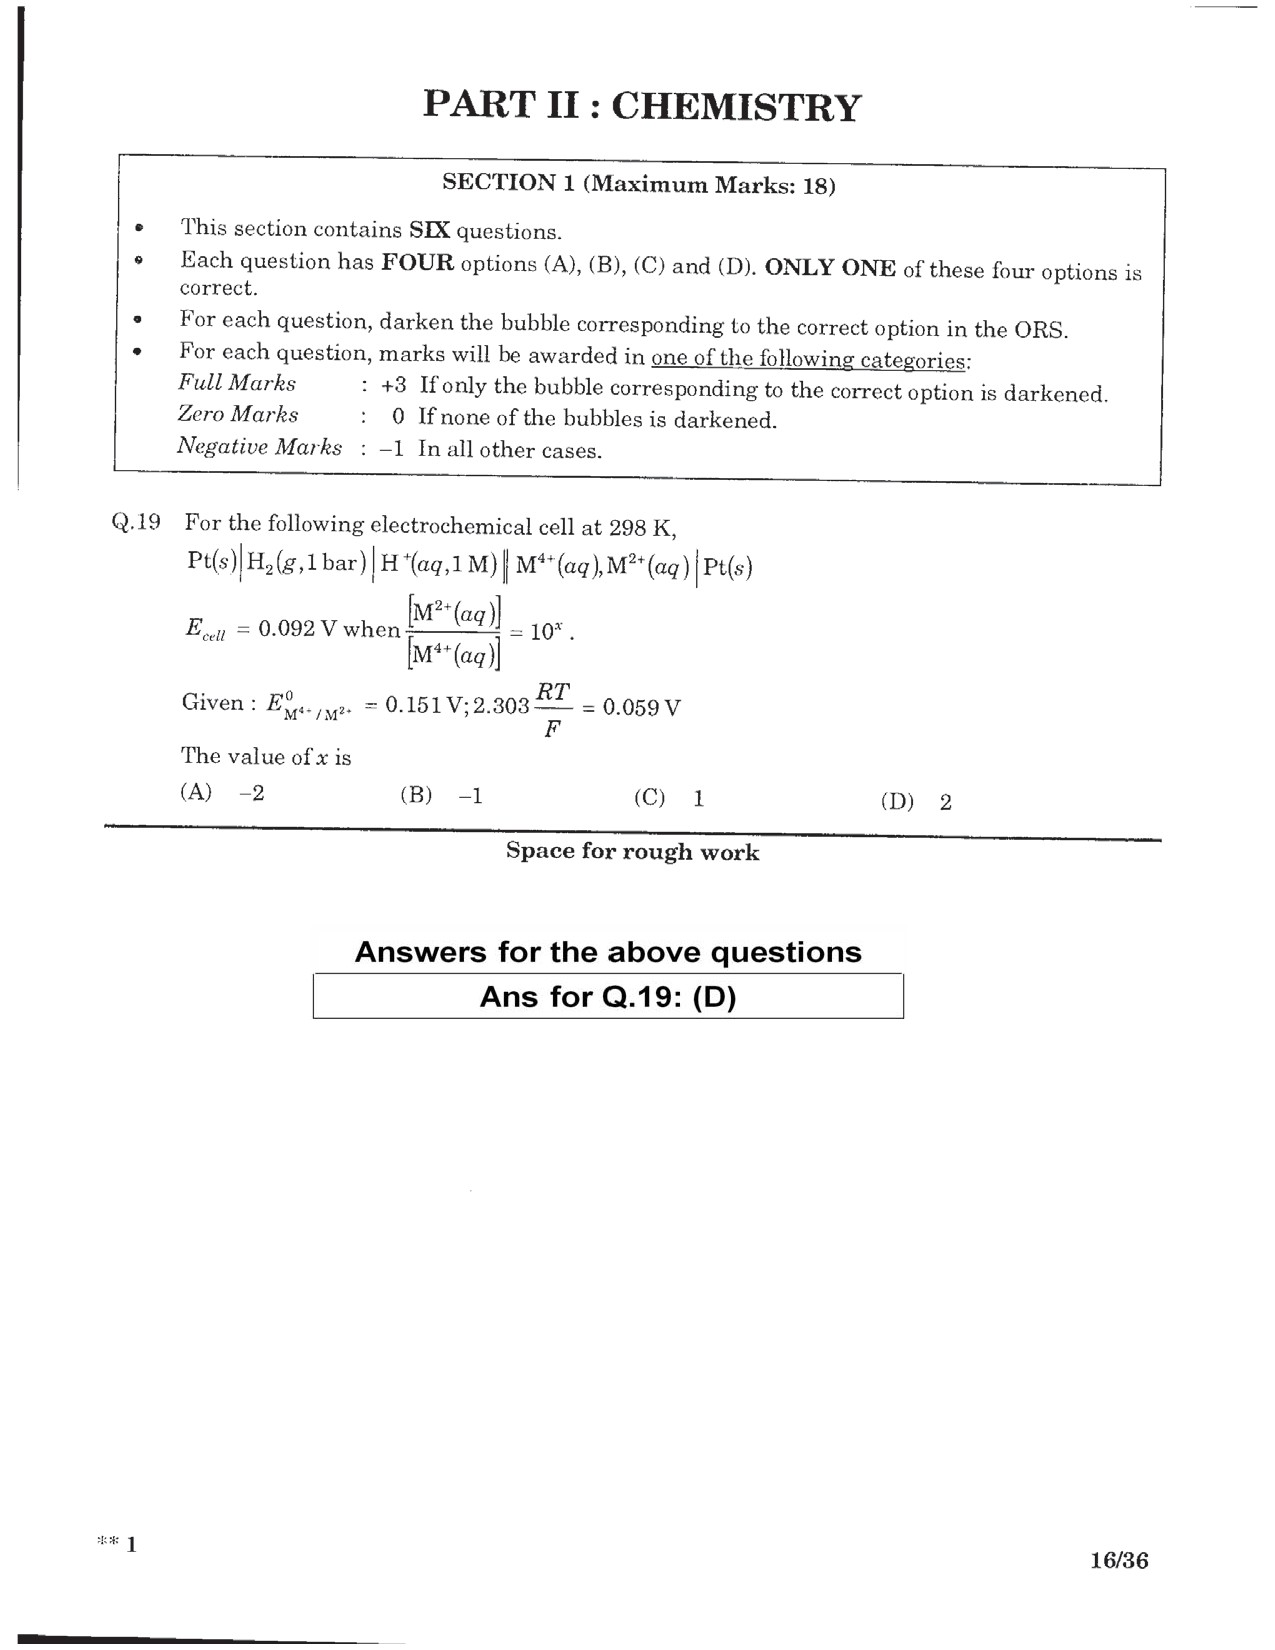 JEE Advanced Exam Question Paper 2016 Paper 2 Chemistry 1